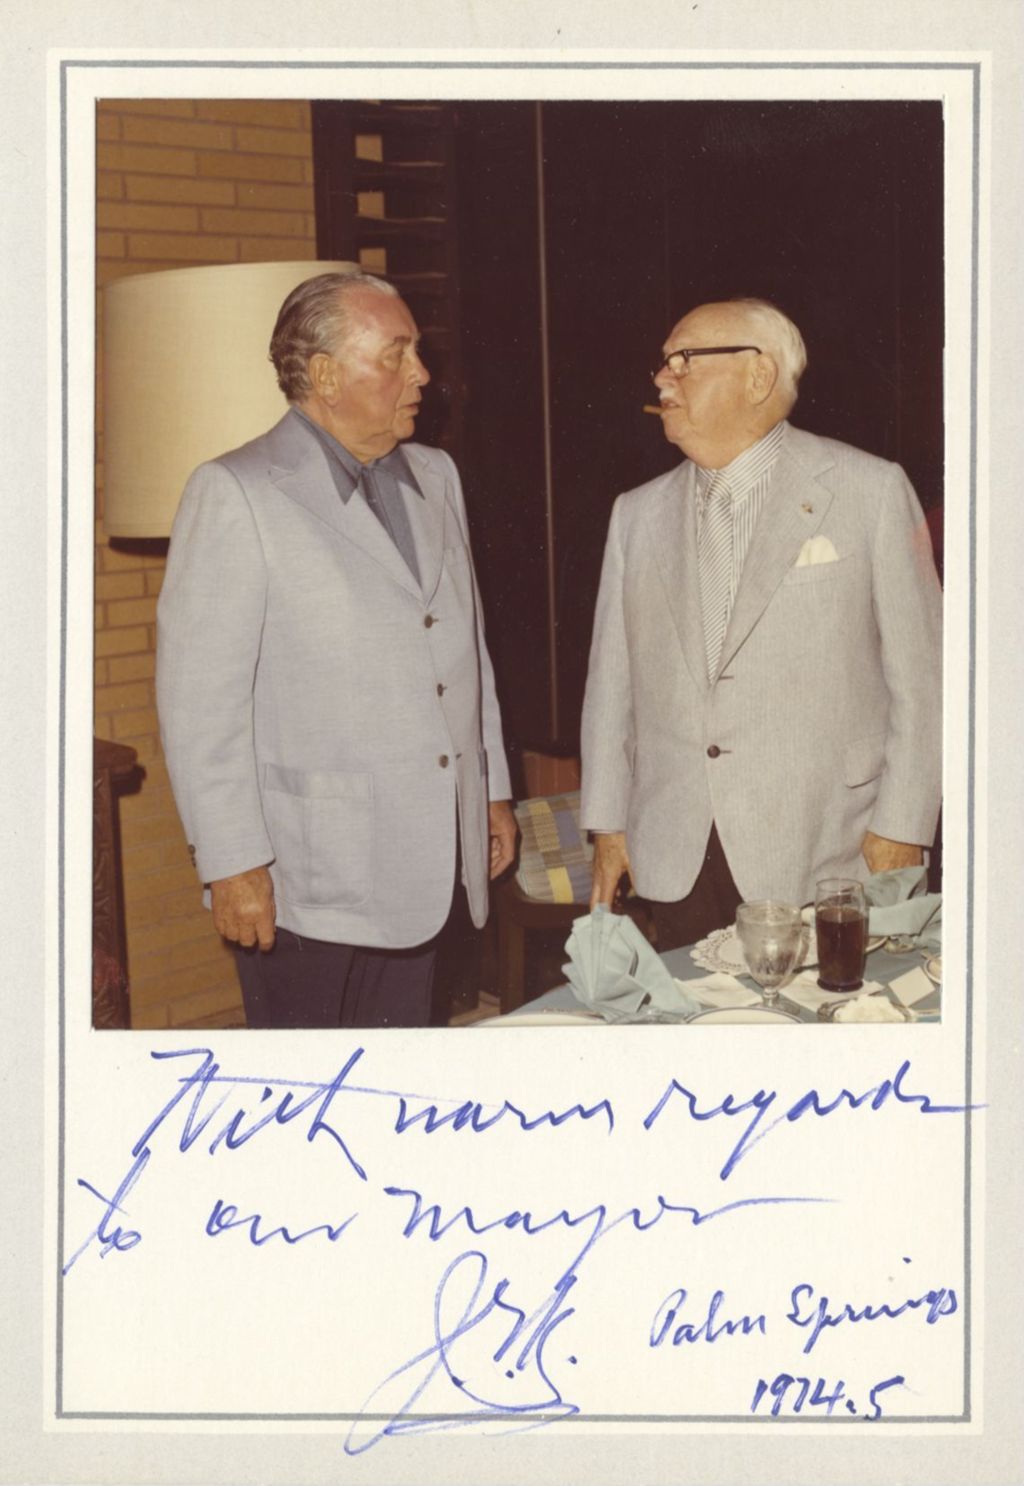 Miniature of Richard J. Daley and James Kemper in Palm Springs